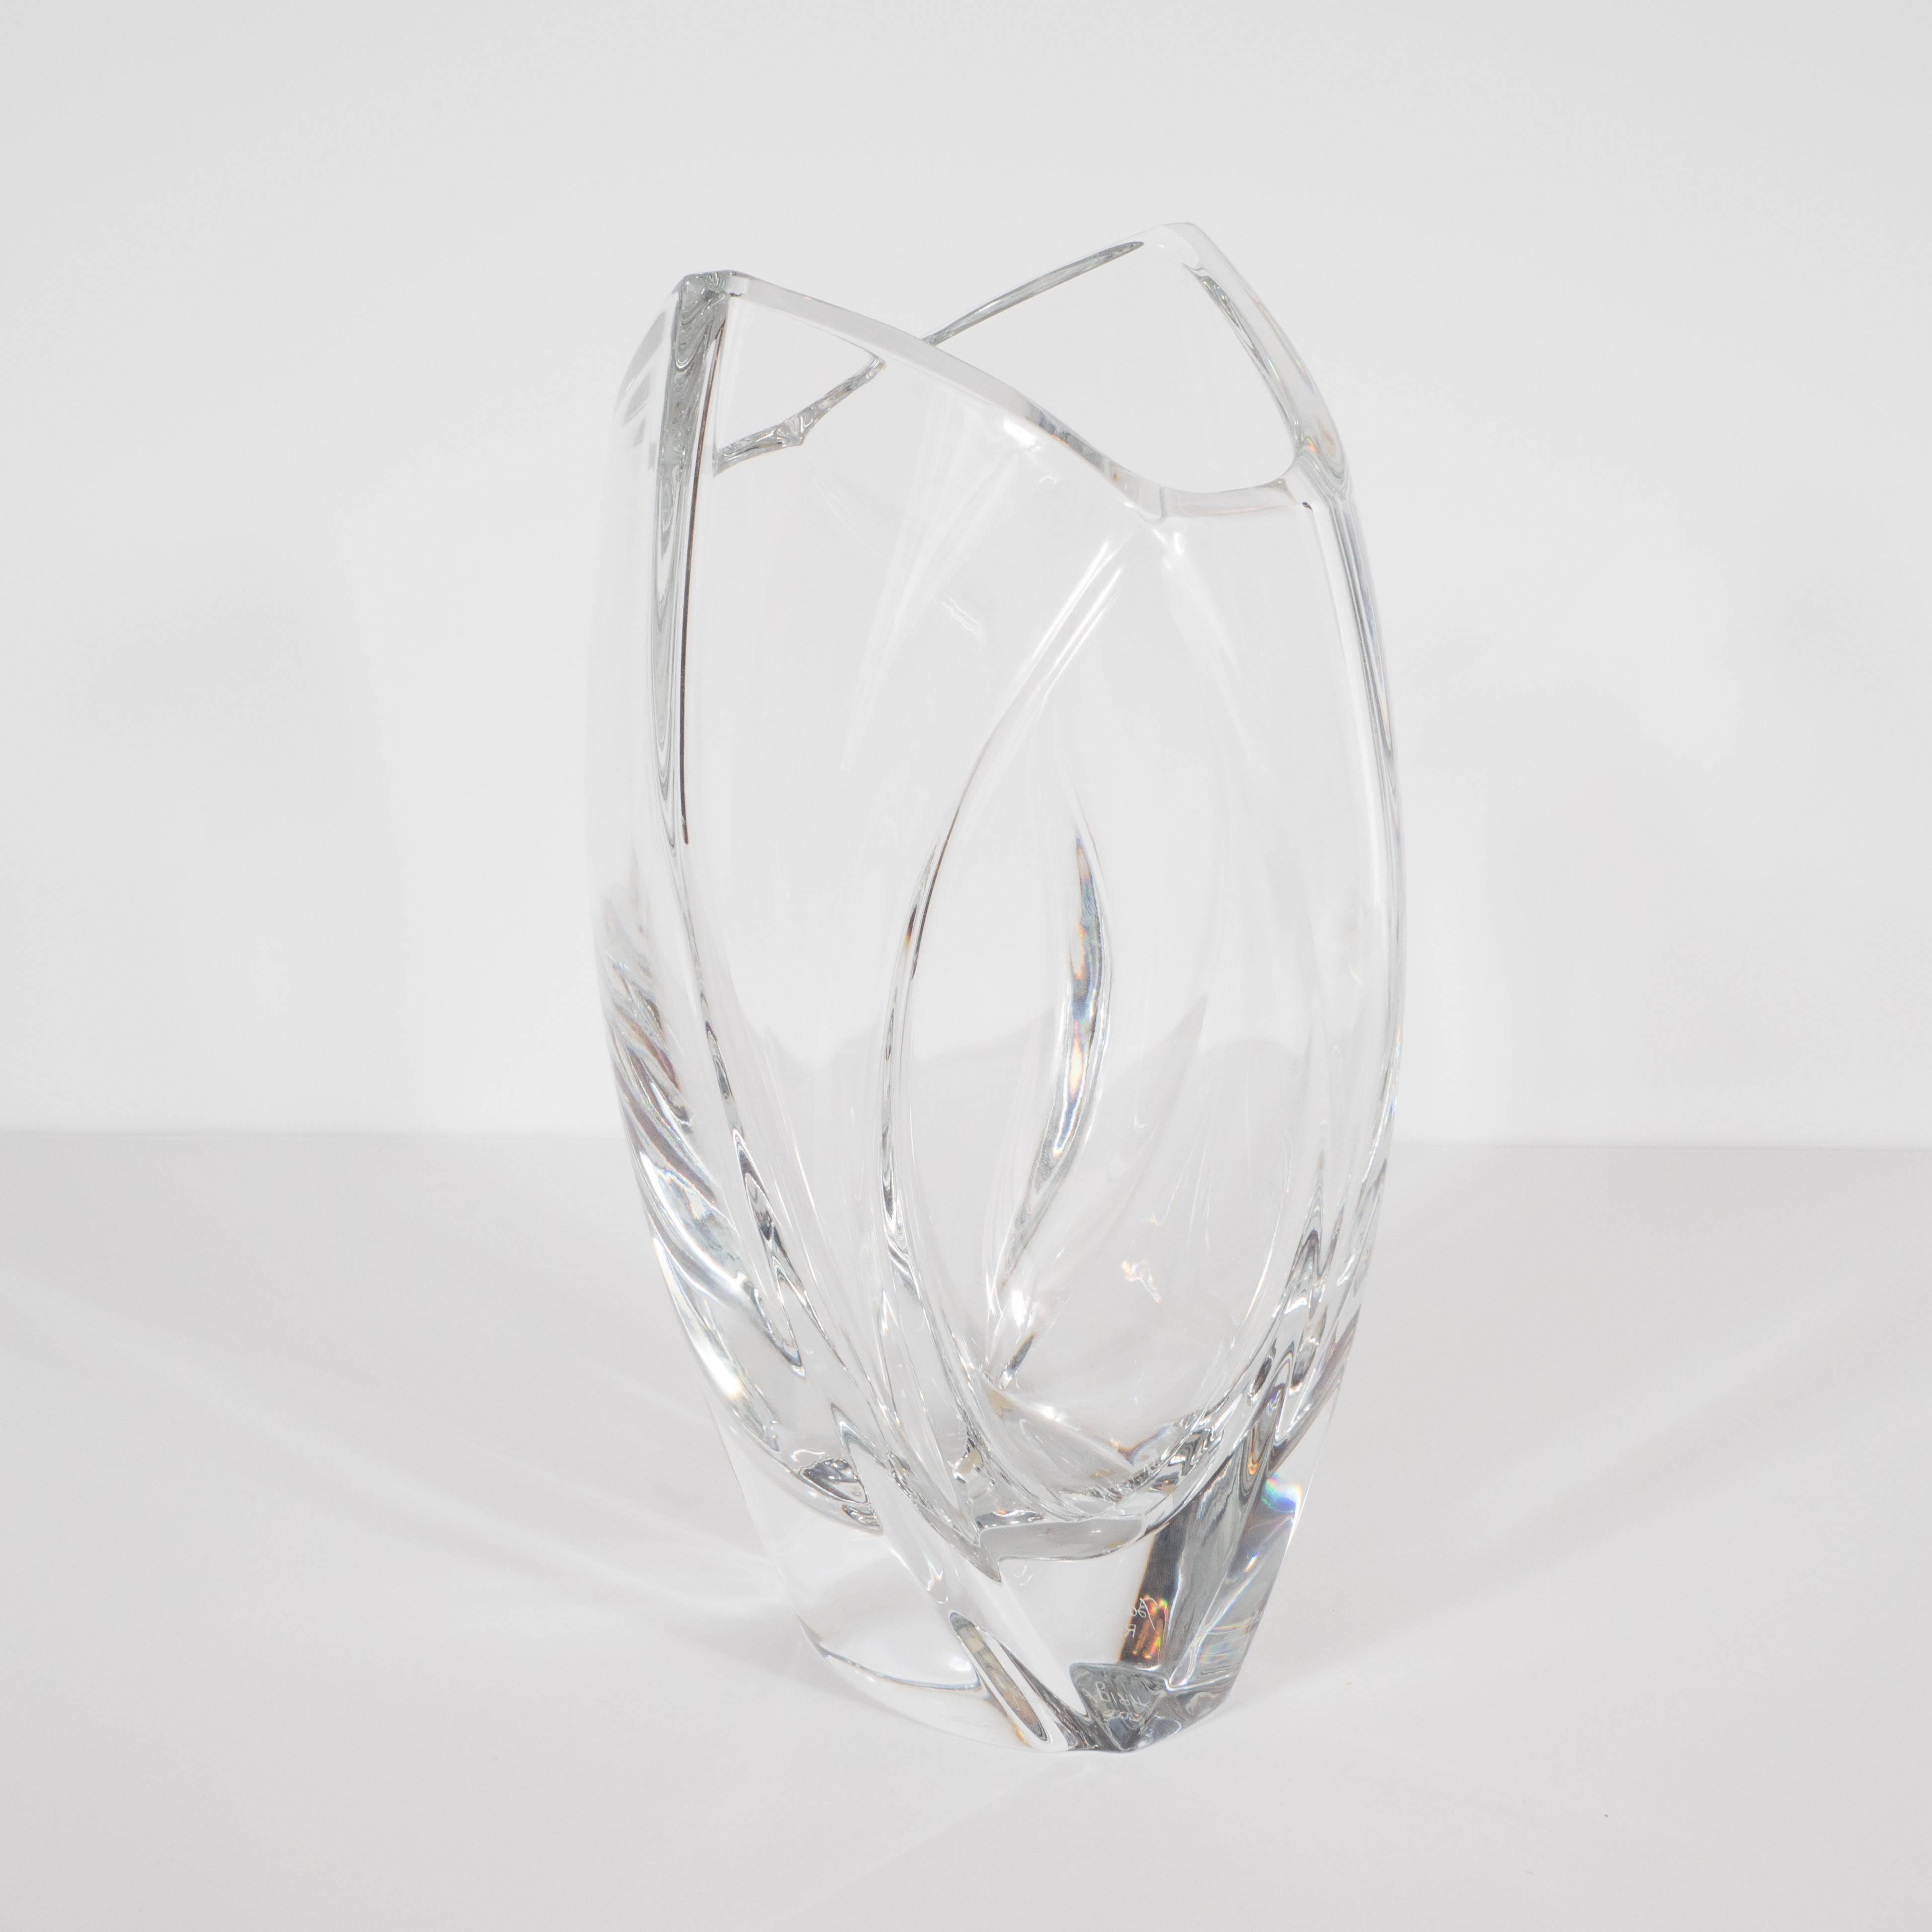 This stunning vase realized by Baccarat- one of France's most illustrious producers of glass products- circa 1970. Baccarat represented the official glassmaker for Louis XV and continues to make some of the finest handblown glass in the world. This